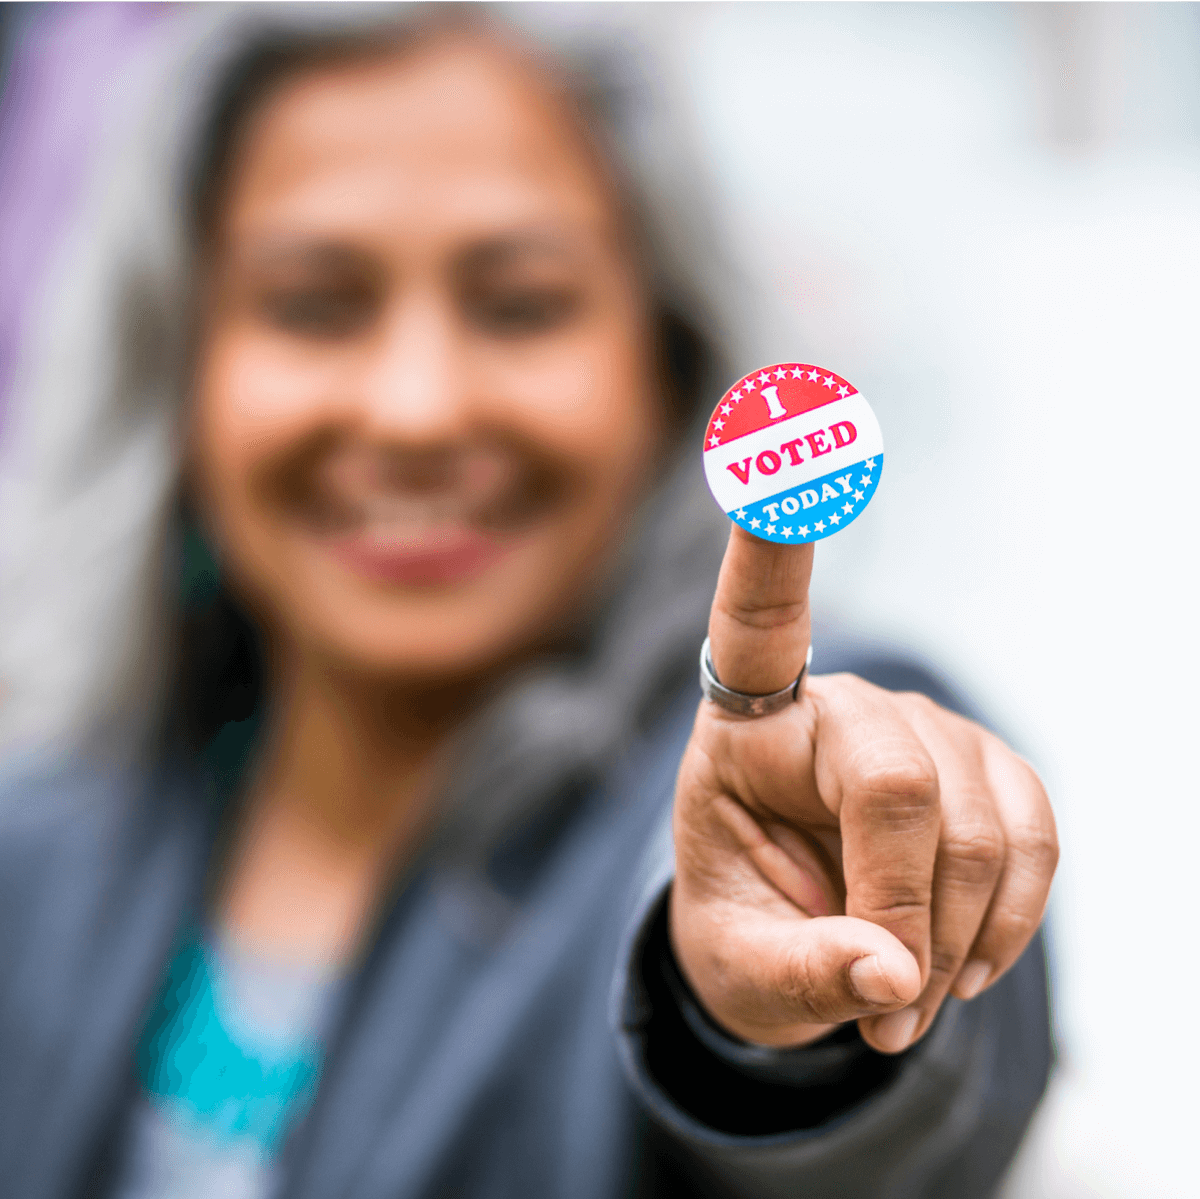 Blurred image of a woman smiling and pointing with an “I Voted” sticker on the tip of her finger in focus.